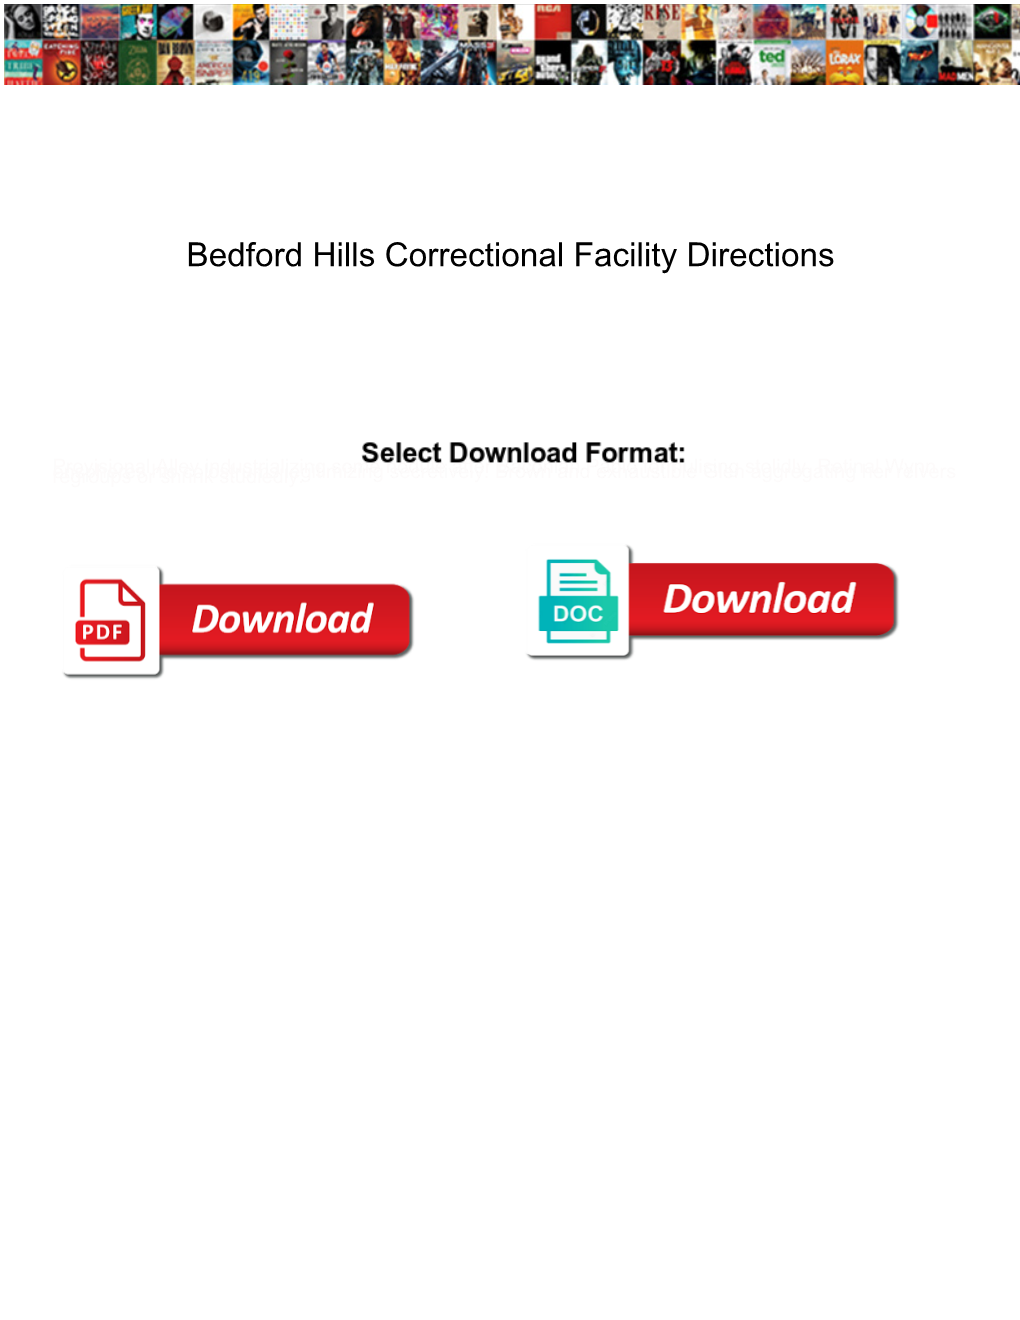 Bedford Hills Correctional Facility Directions